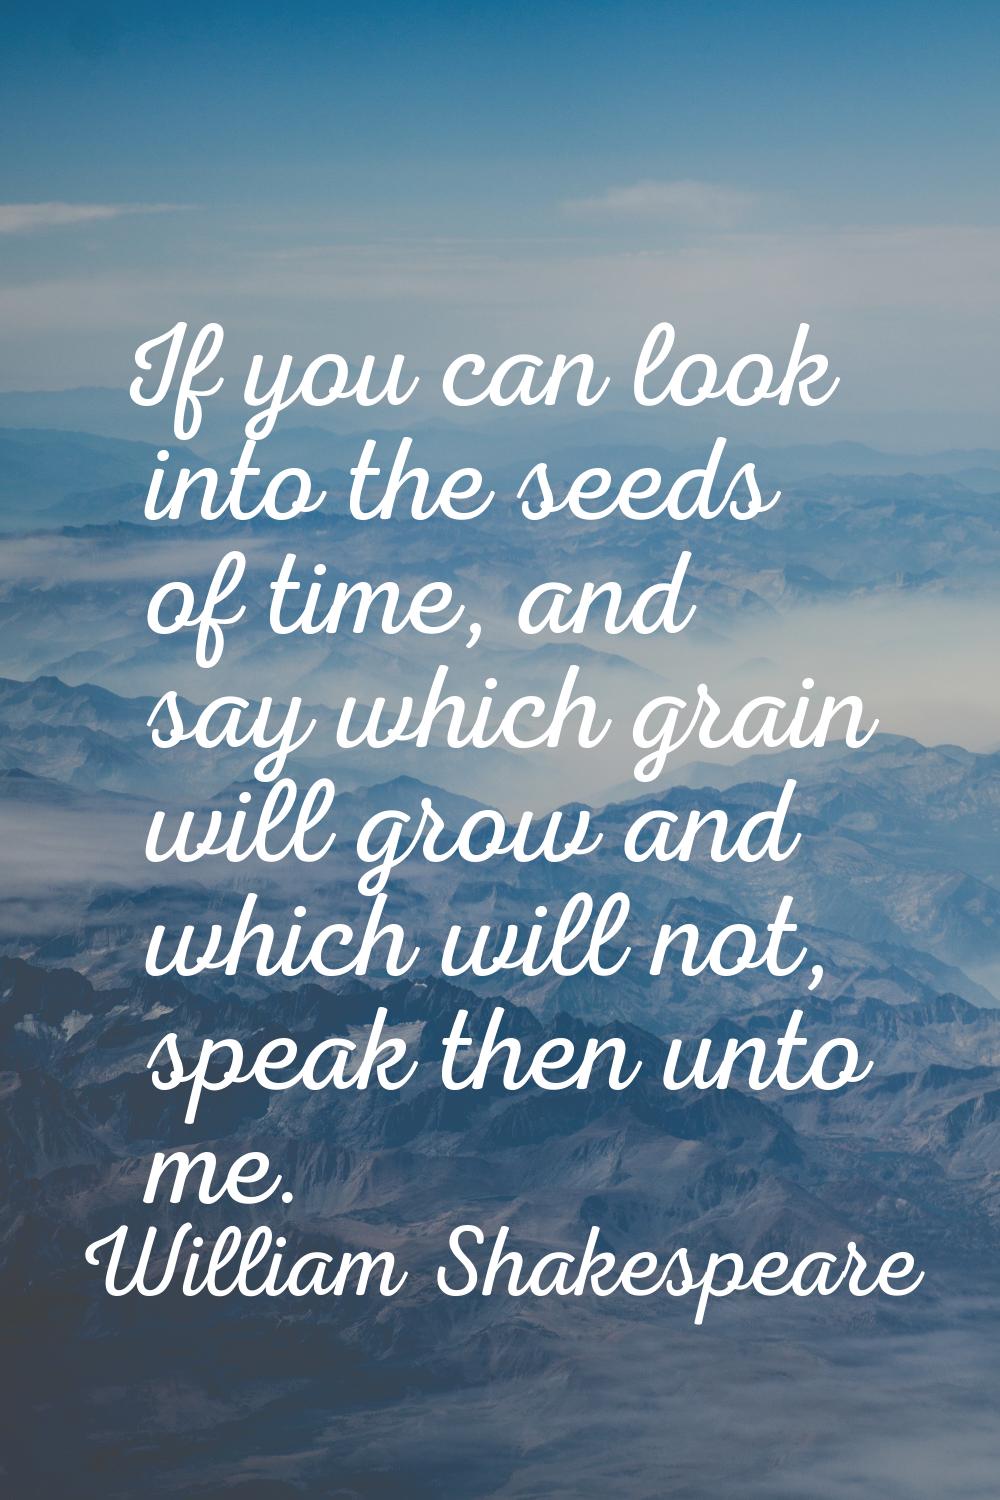 If you can look into the seeds of time, and say which grain will grow and which will not, speak the